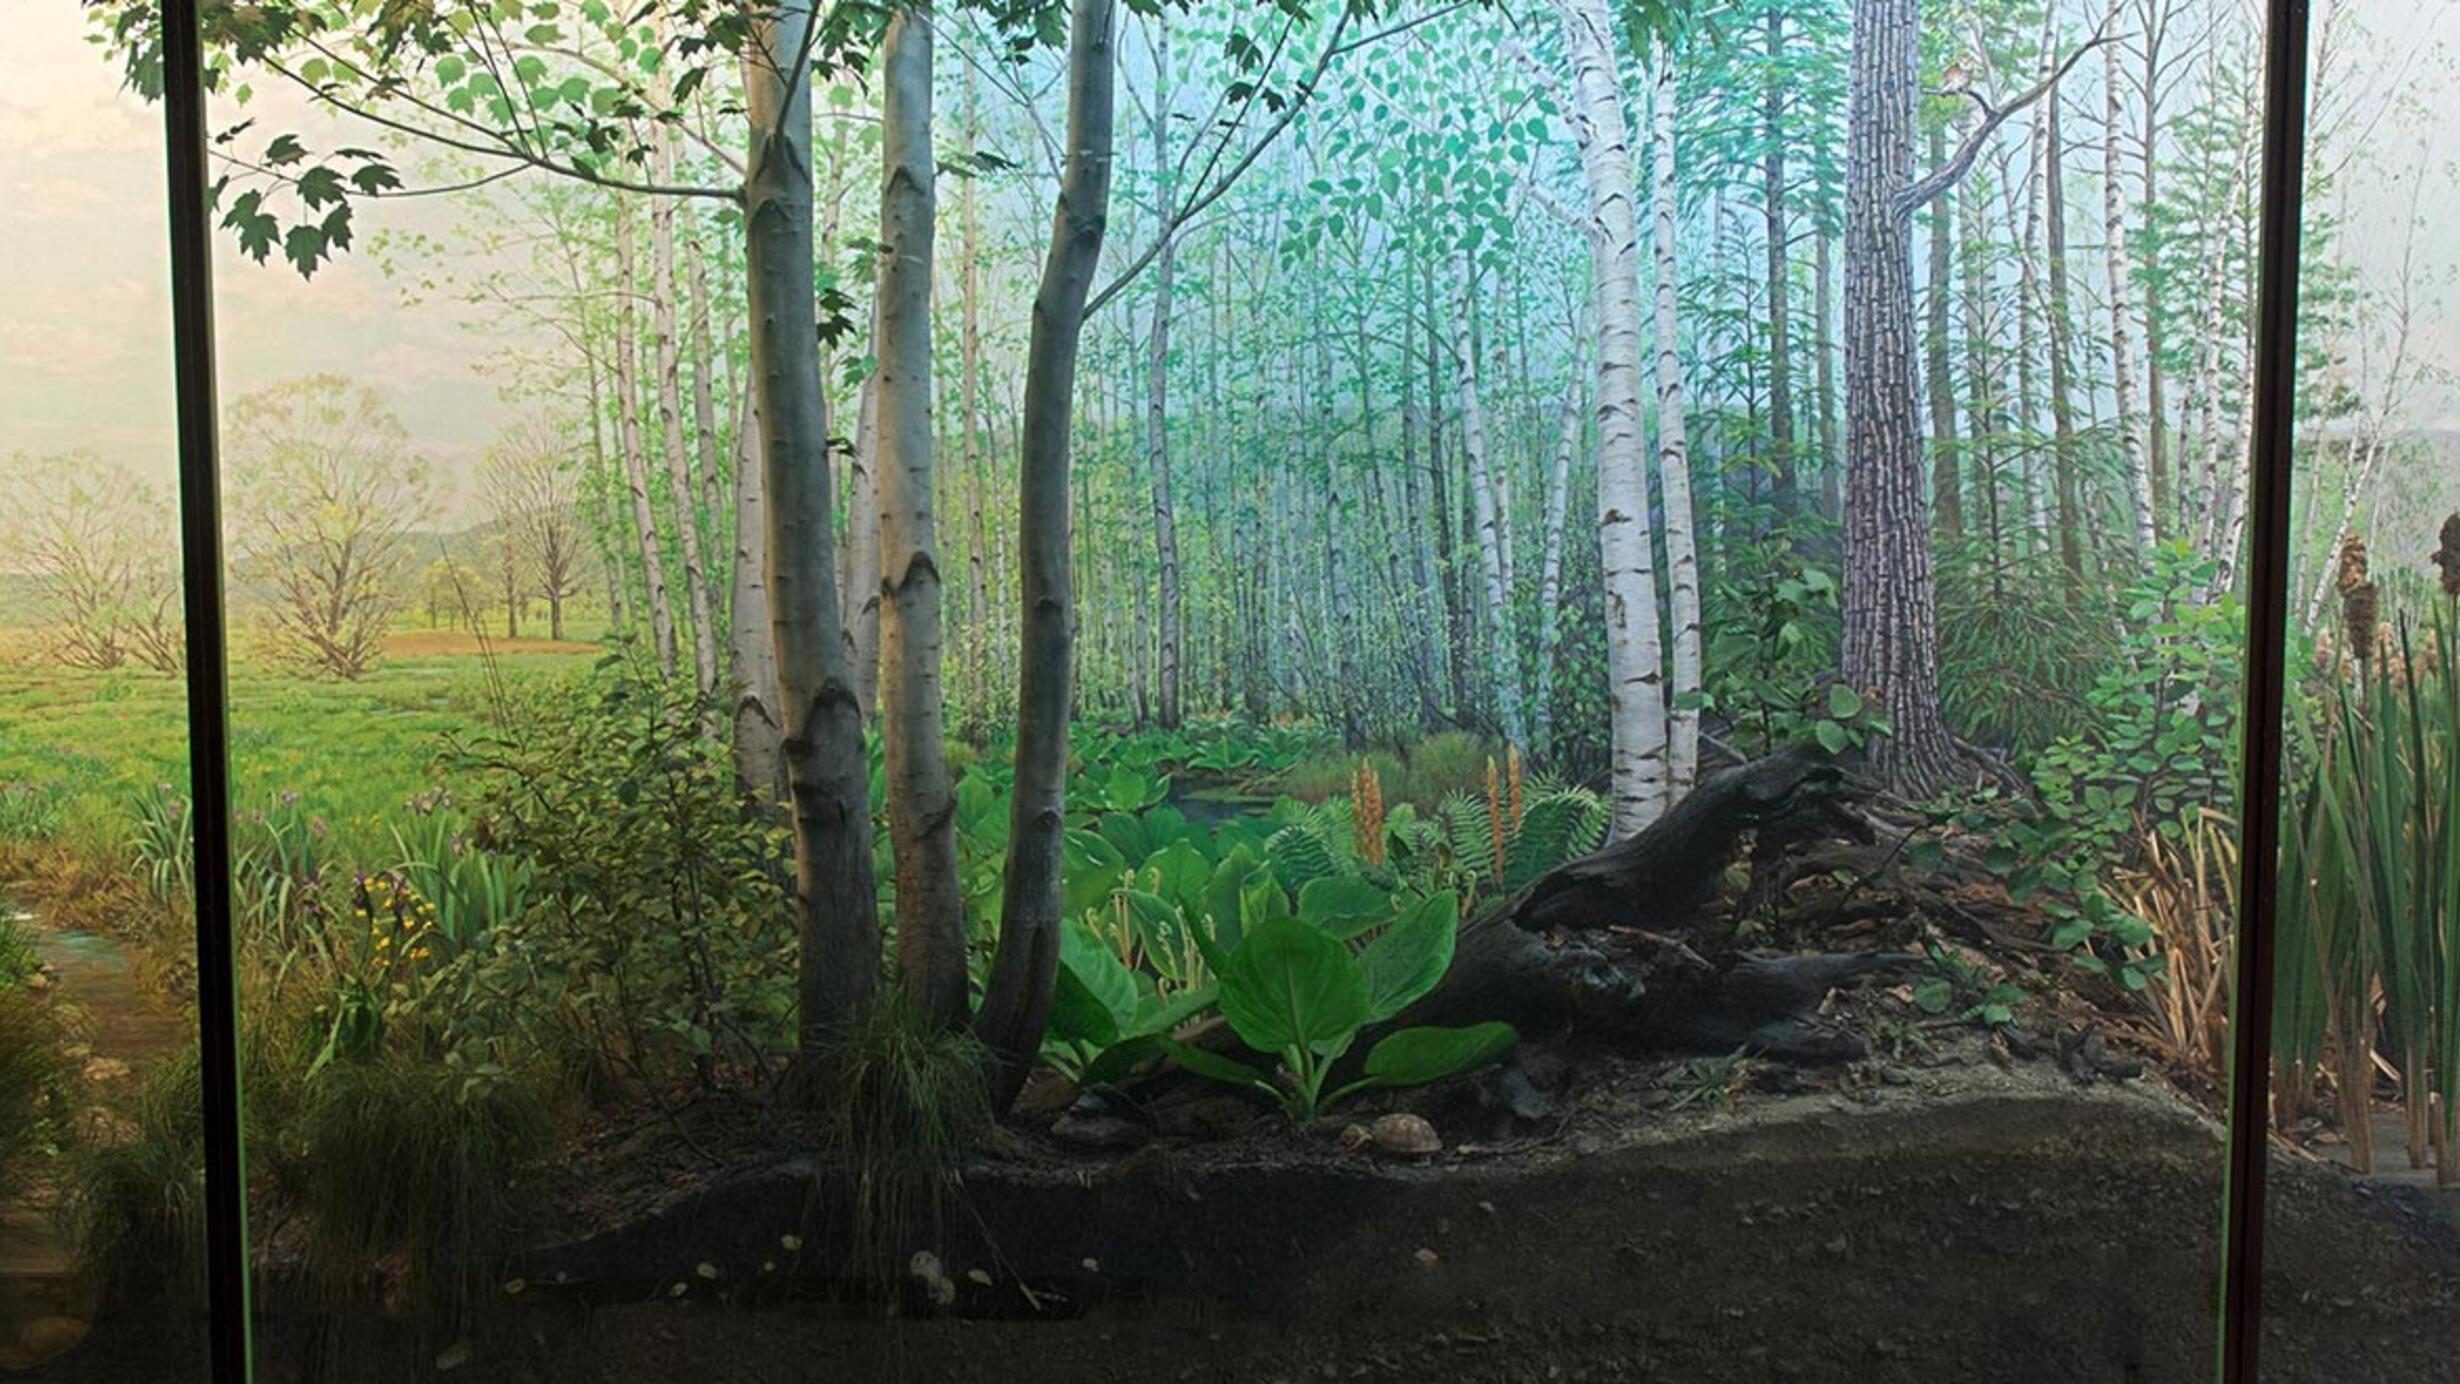 Museum diorama depicting the evolution of a landscape from a swamp (right), to a forest (middle), to a cleared grassy space (left).